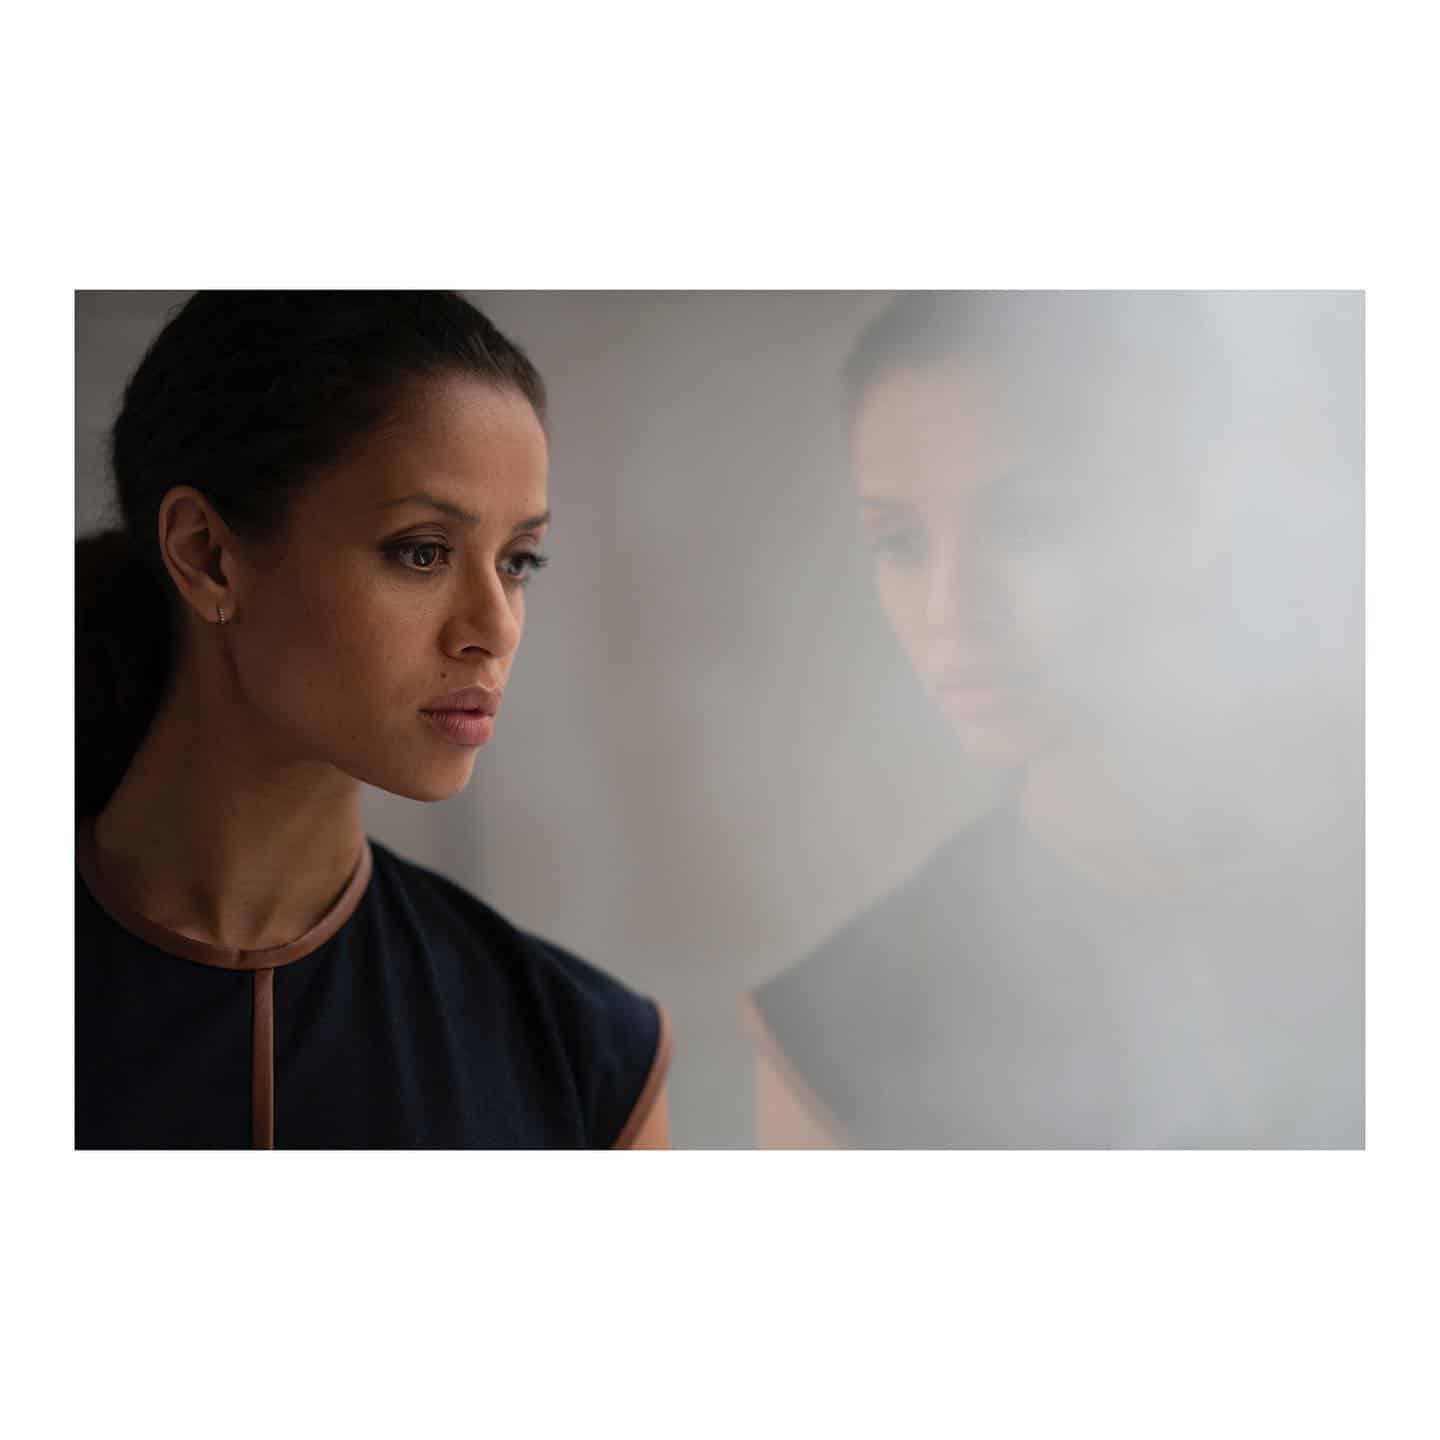 FIRST LOOK of @gugumbatharaw and @jessicakate_plummer in coming to @bbcone & @hbomax 
.
.
.